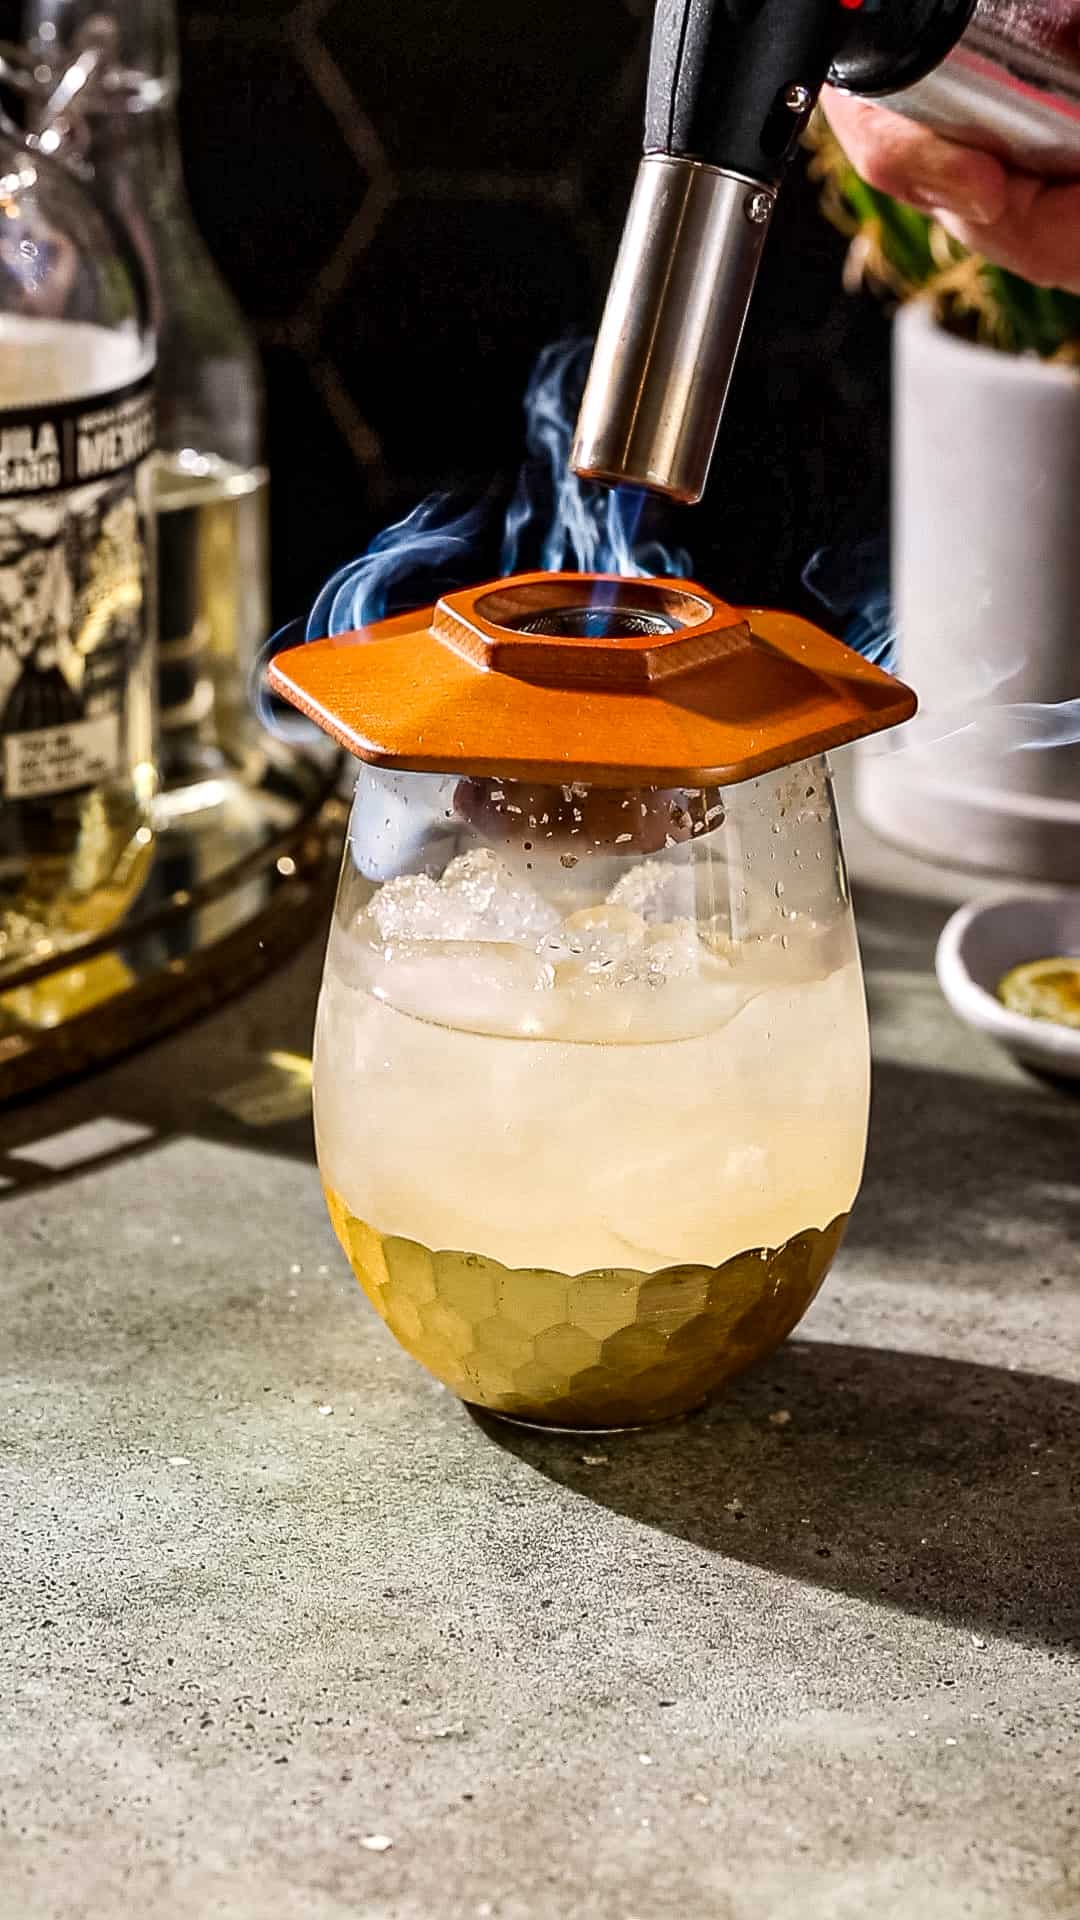 Hand using a kitchen torch to ignite the wood chips in a cocktail smoker that is sitting on top of a cocktail serving glass filled with ice and liquid.